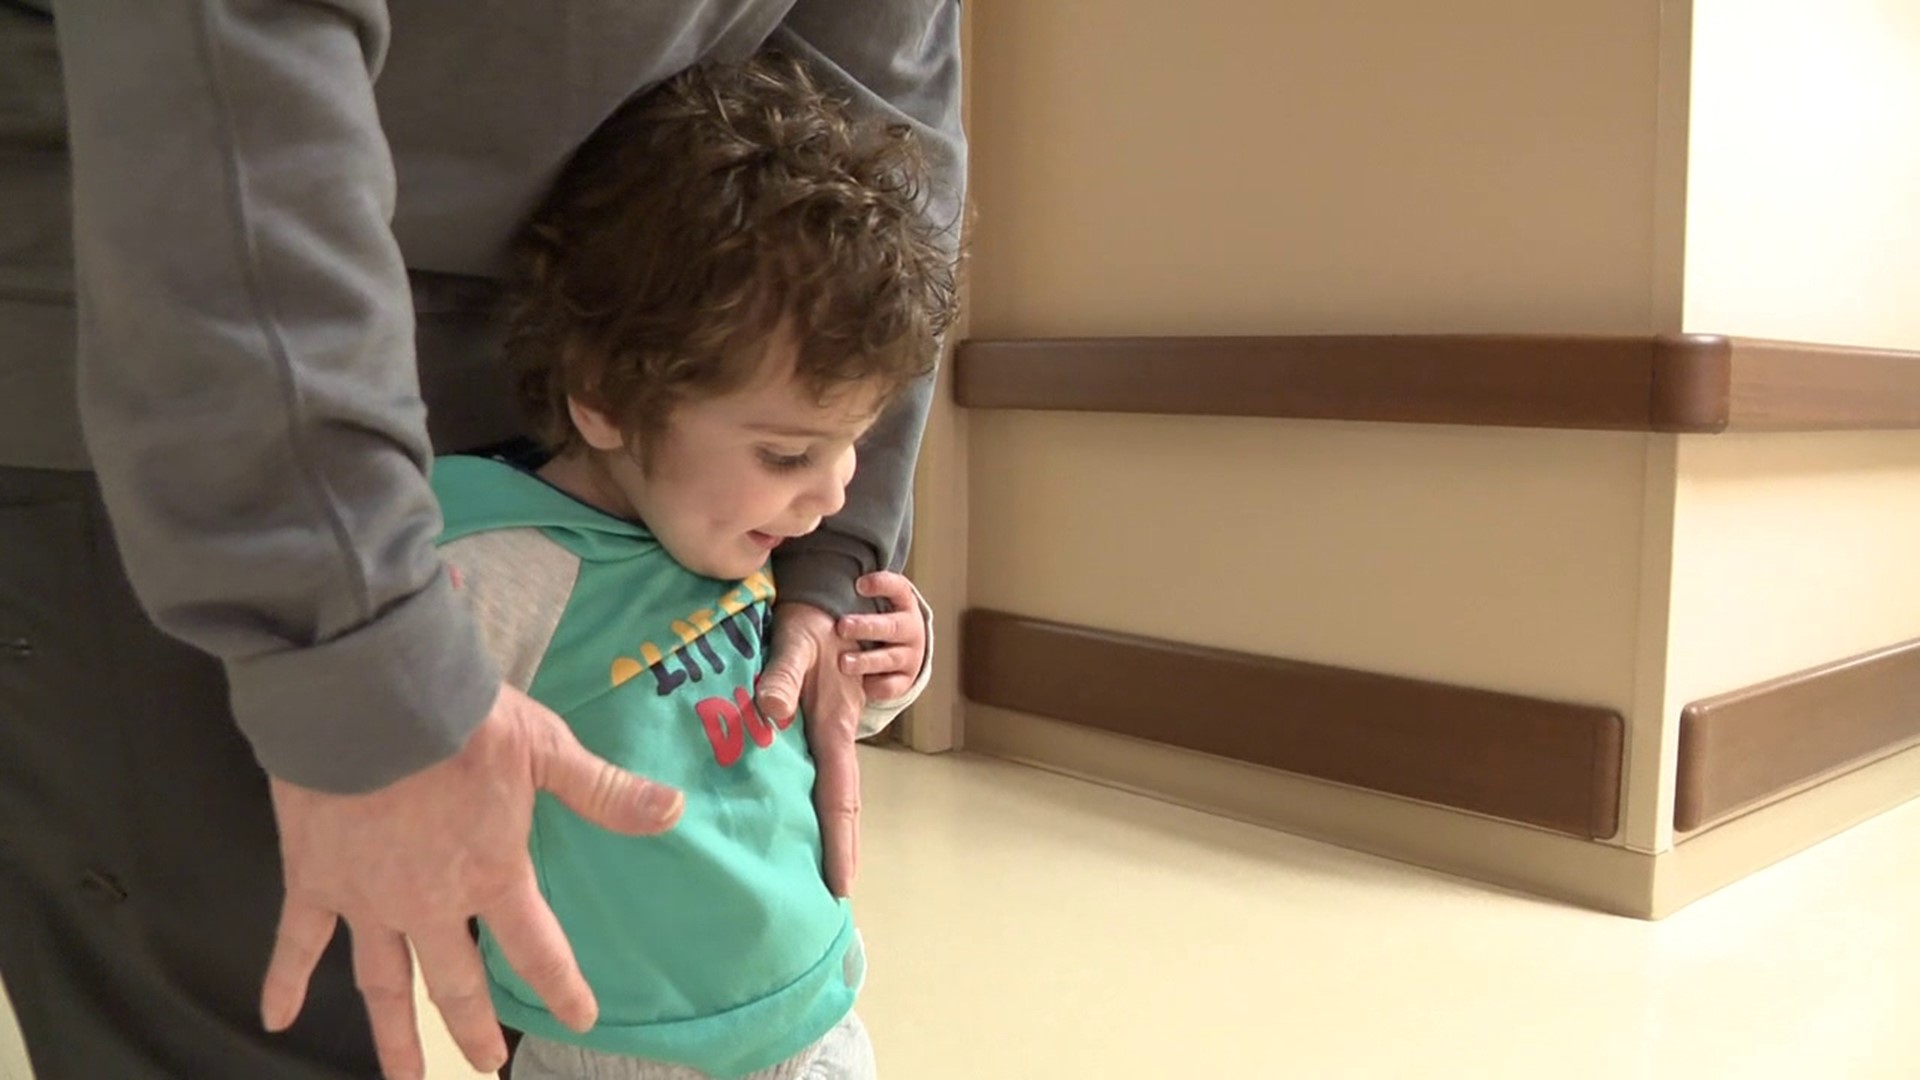 Two-year-old Emmi comes to Allied Services in Wilkes-Barre every week to see his therapist Jean. He's learning how to walk after suffering a traumatic brain injury.